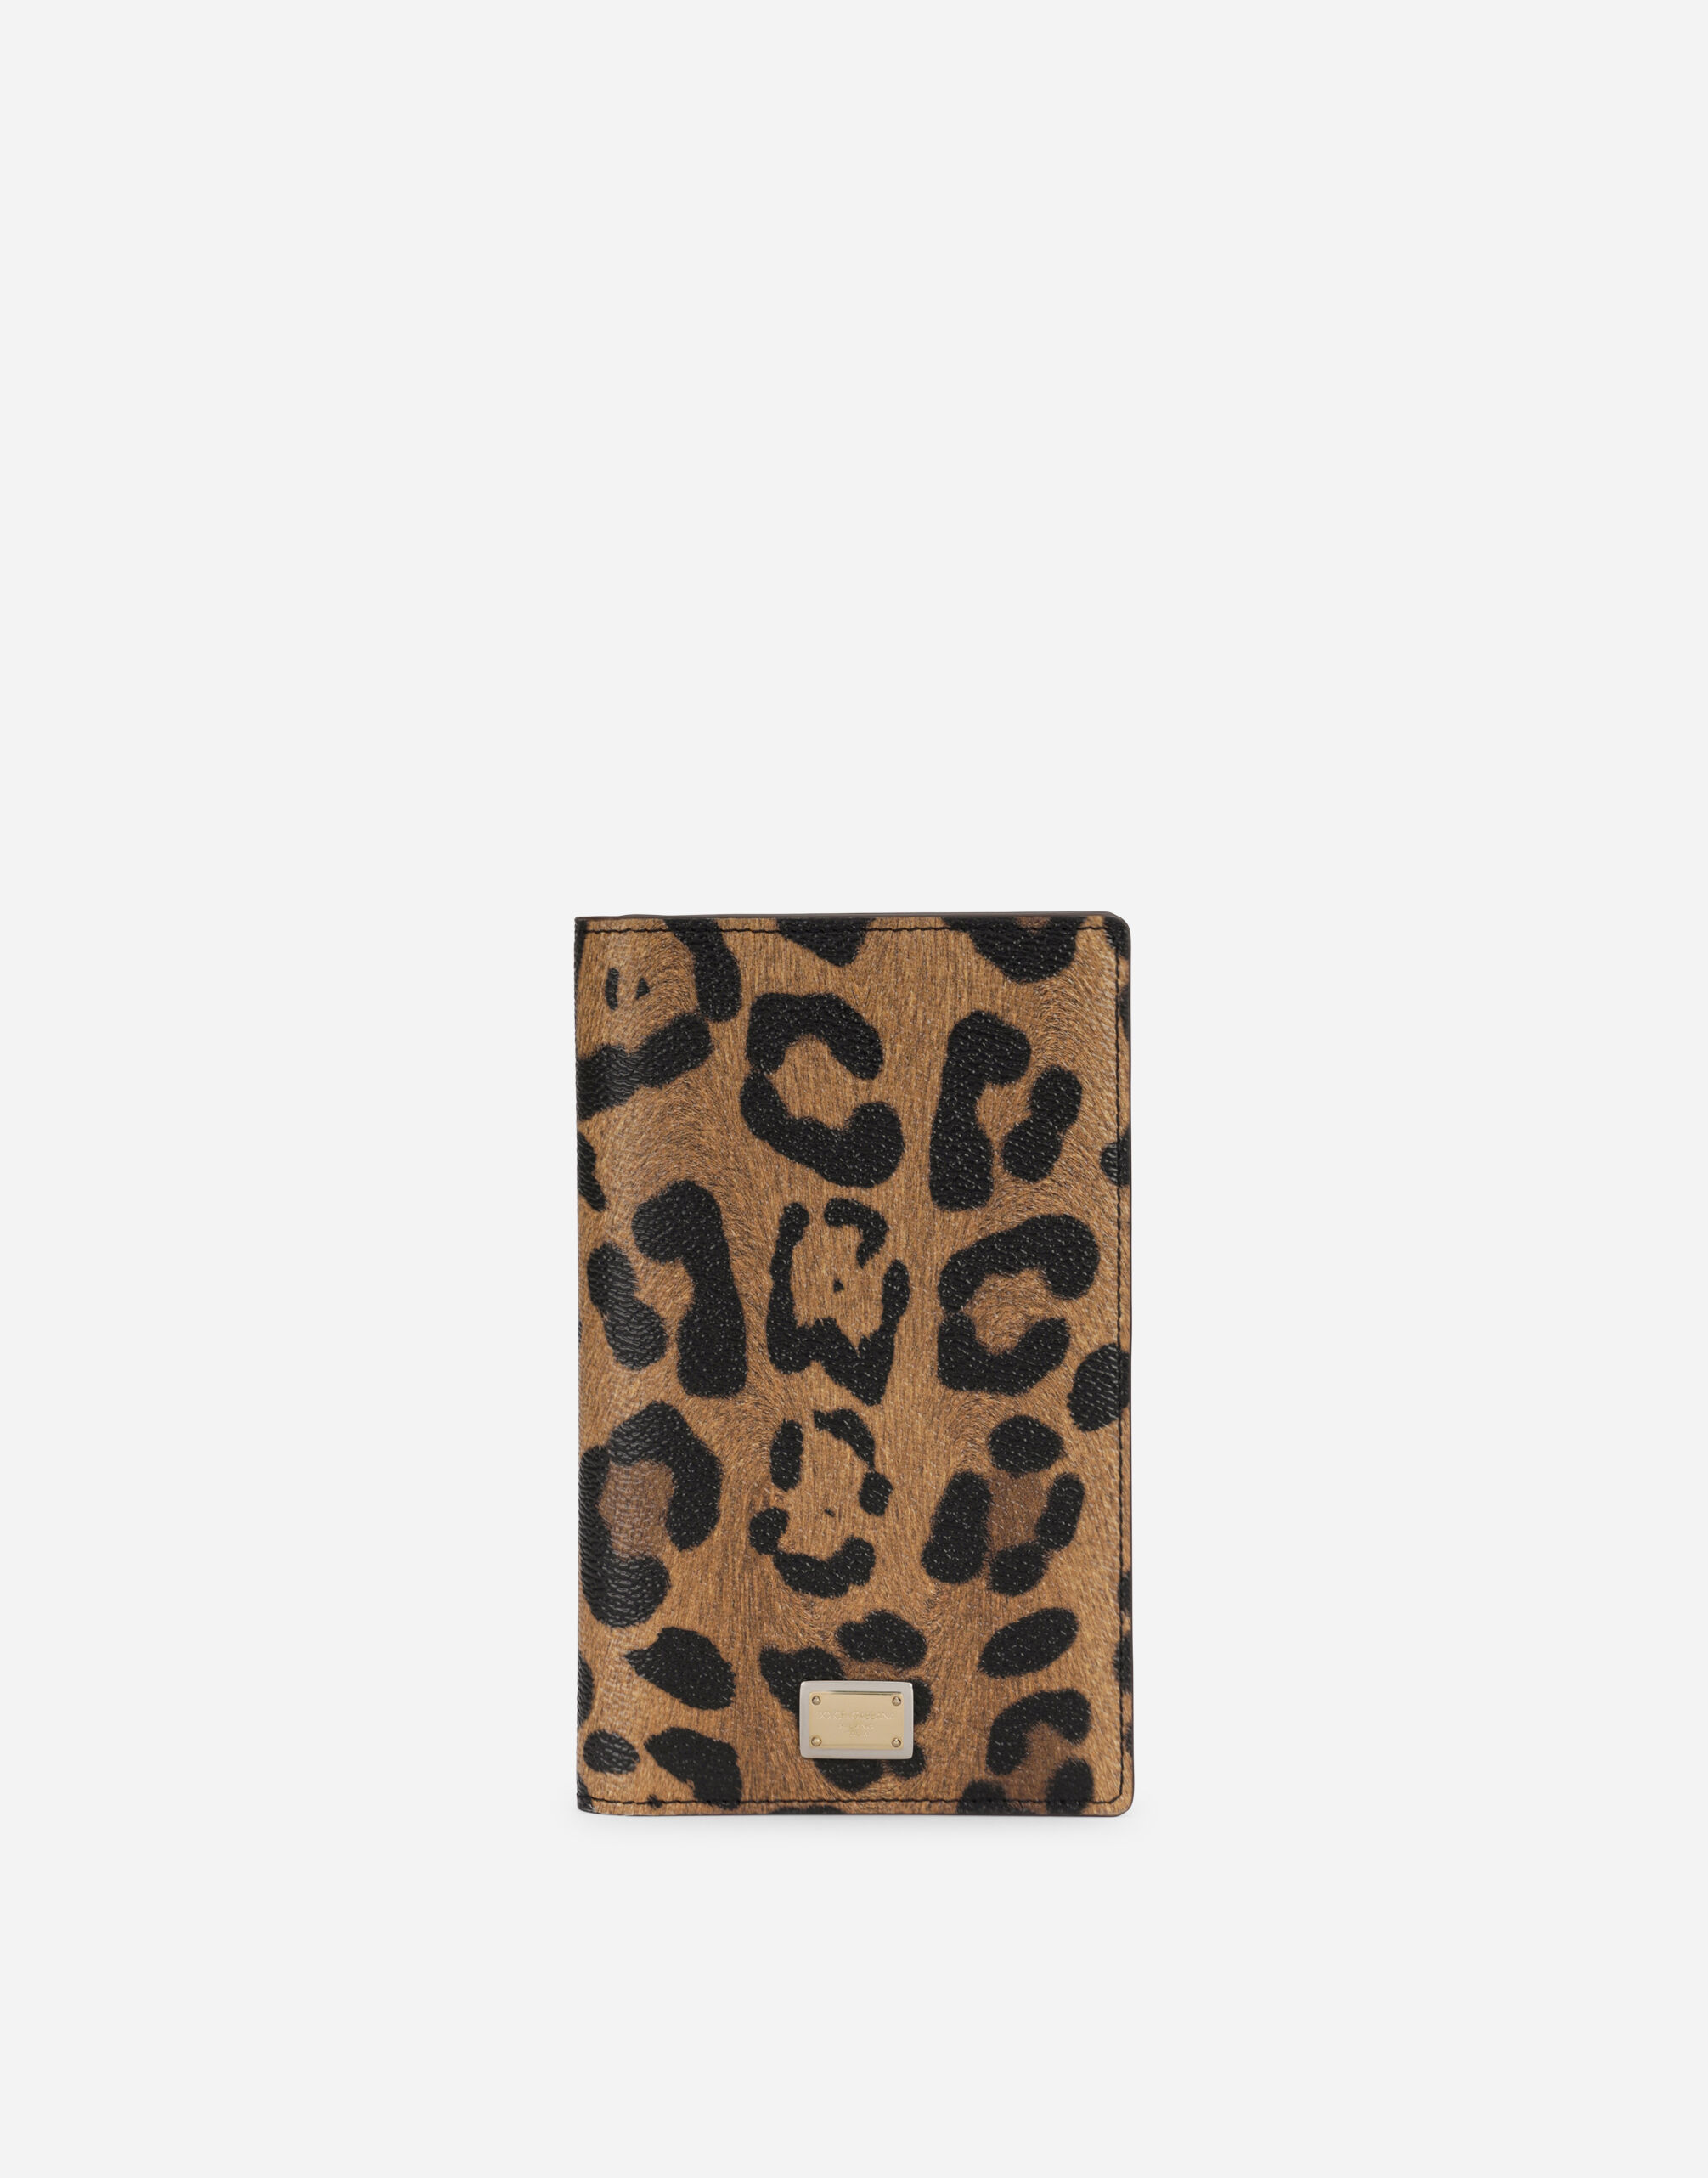 Dolce & Gabbana Leopard-print Crespo passport holder with branded plate Multicolor BB2206AW384